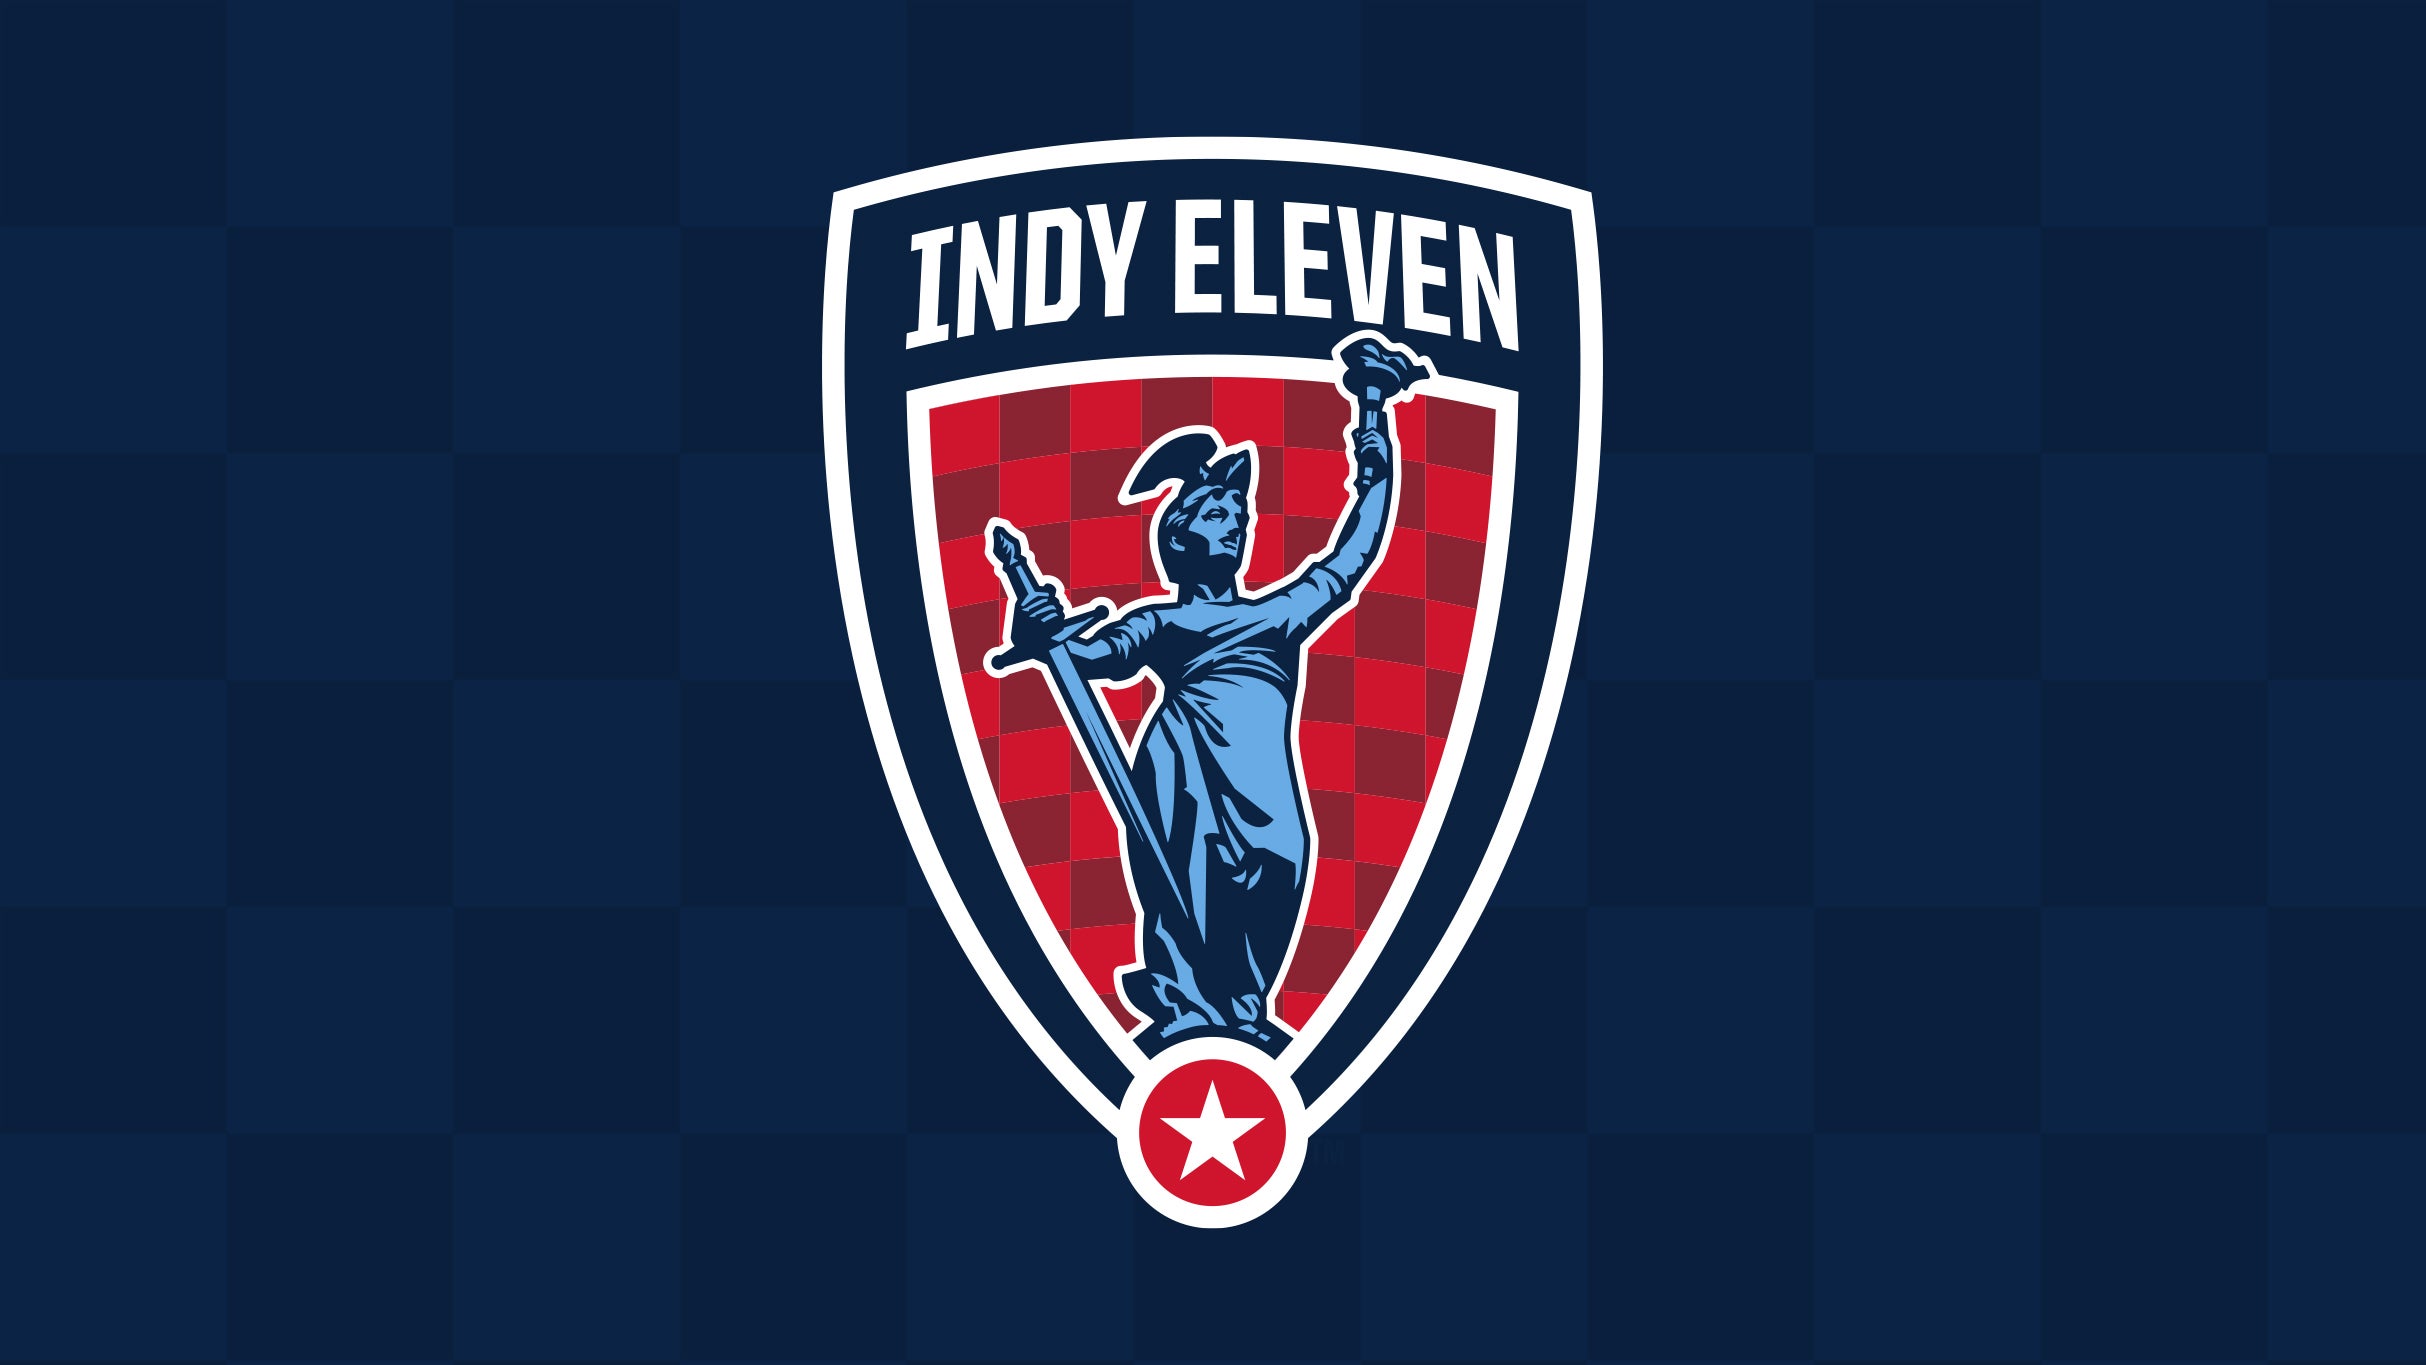 Indy Eleven vs. Pittsburgh Riverhounds SC at Carroll Stadium